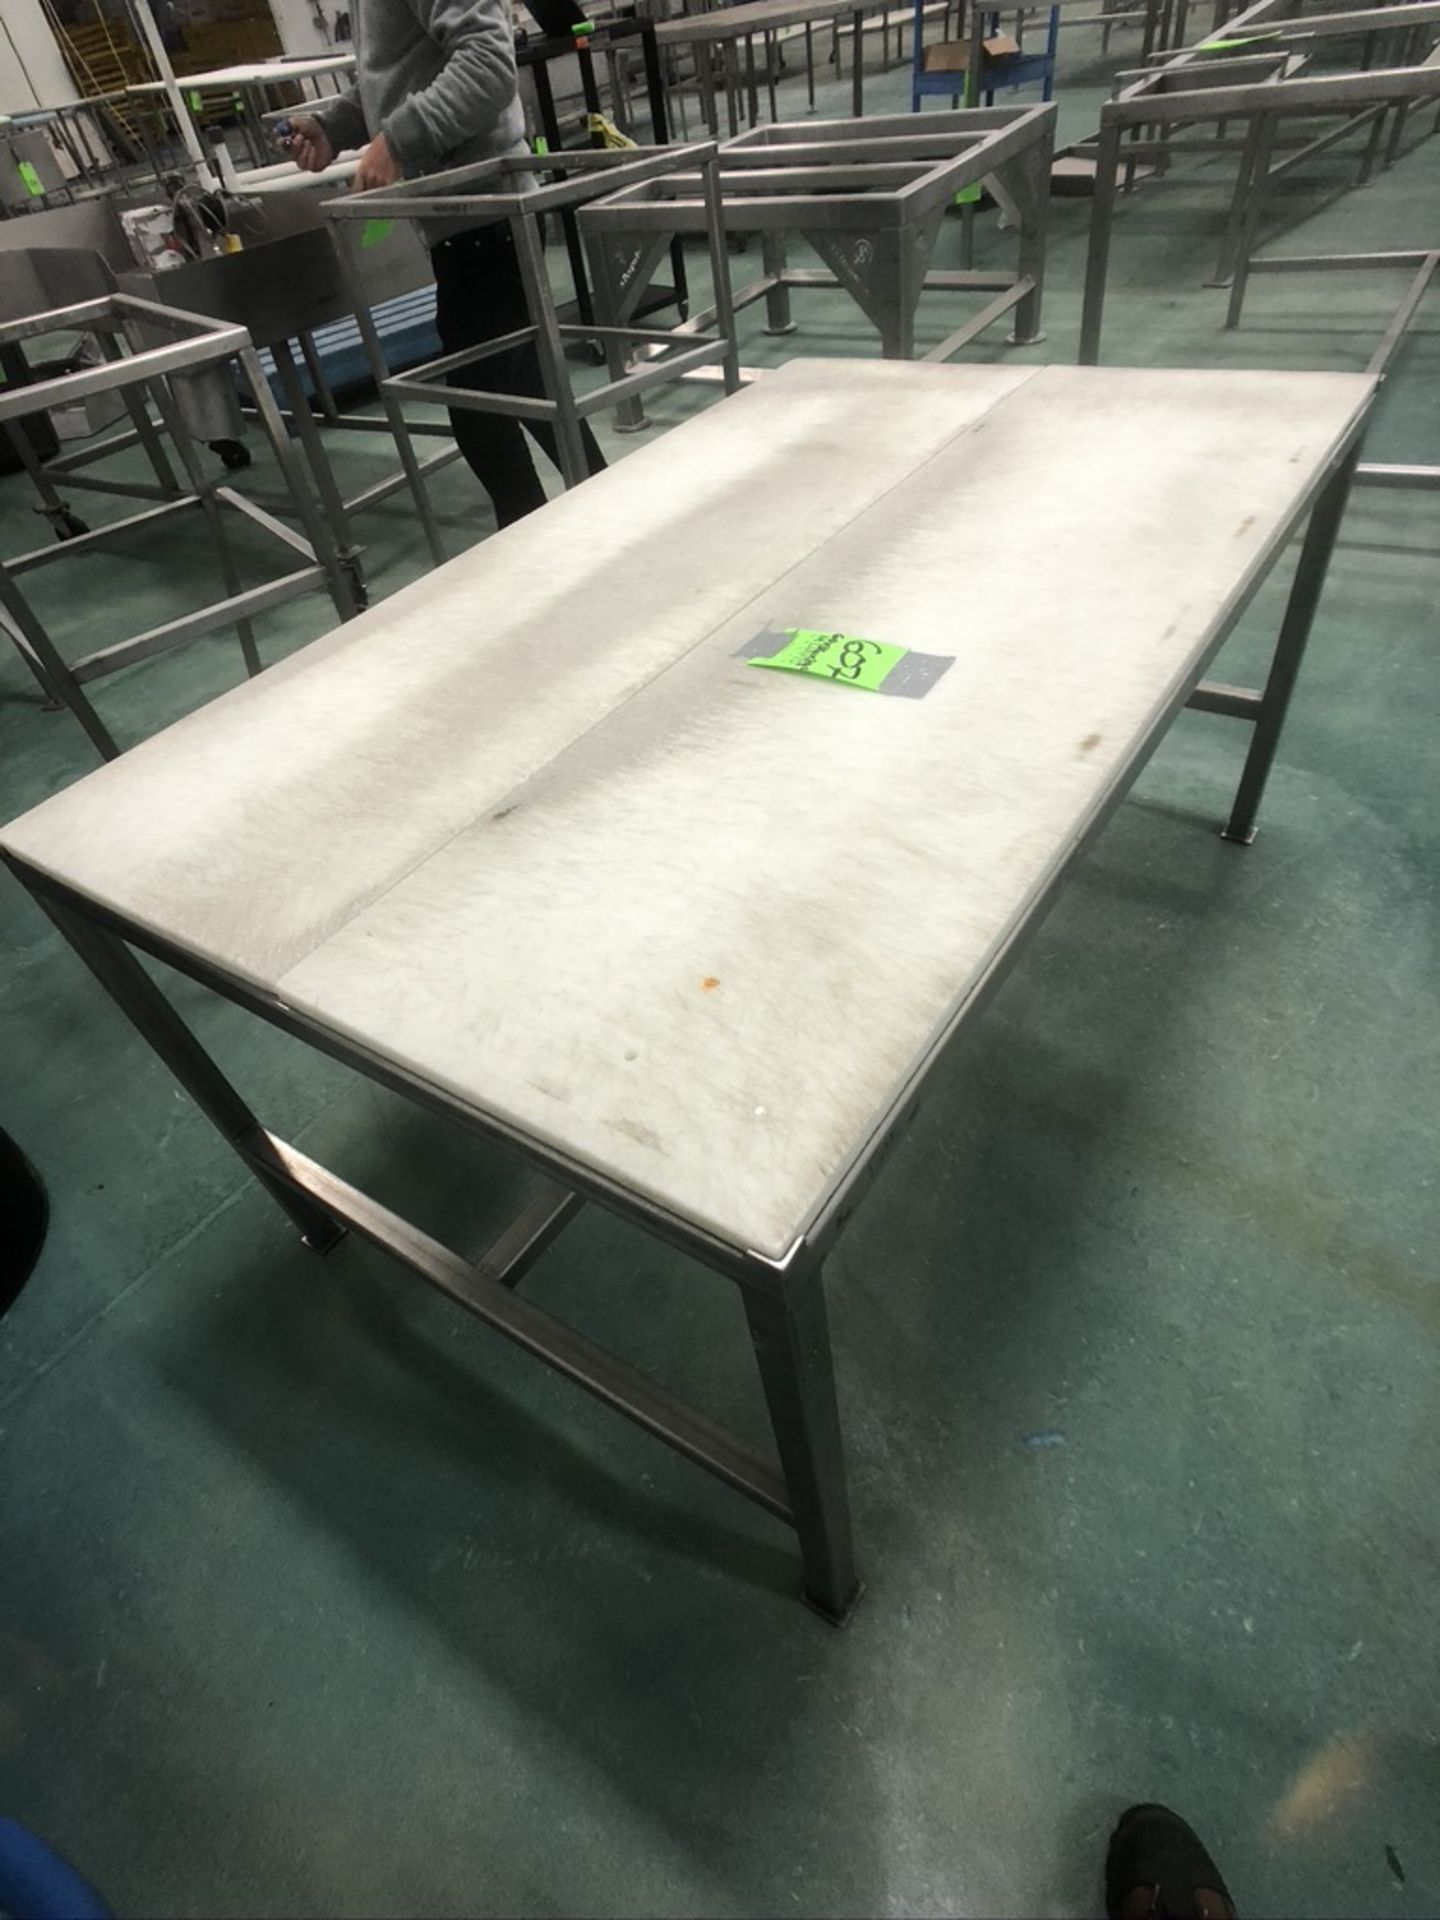 S/S TABLE WITH UMHW CUTTING BOARD TOP, APPX DIM. LWH'' 60 X 36 X 29